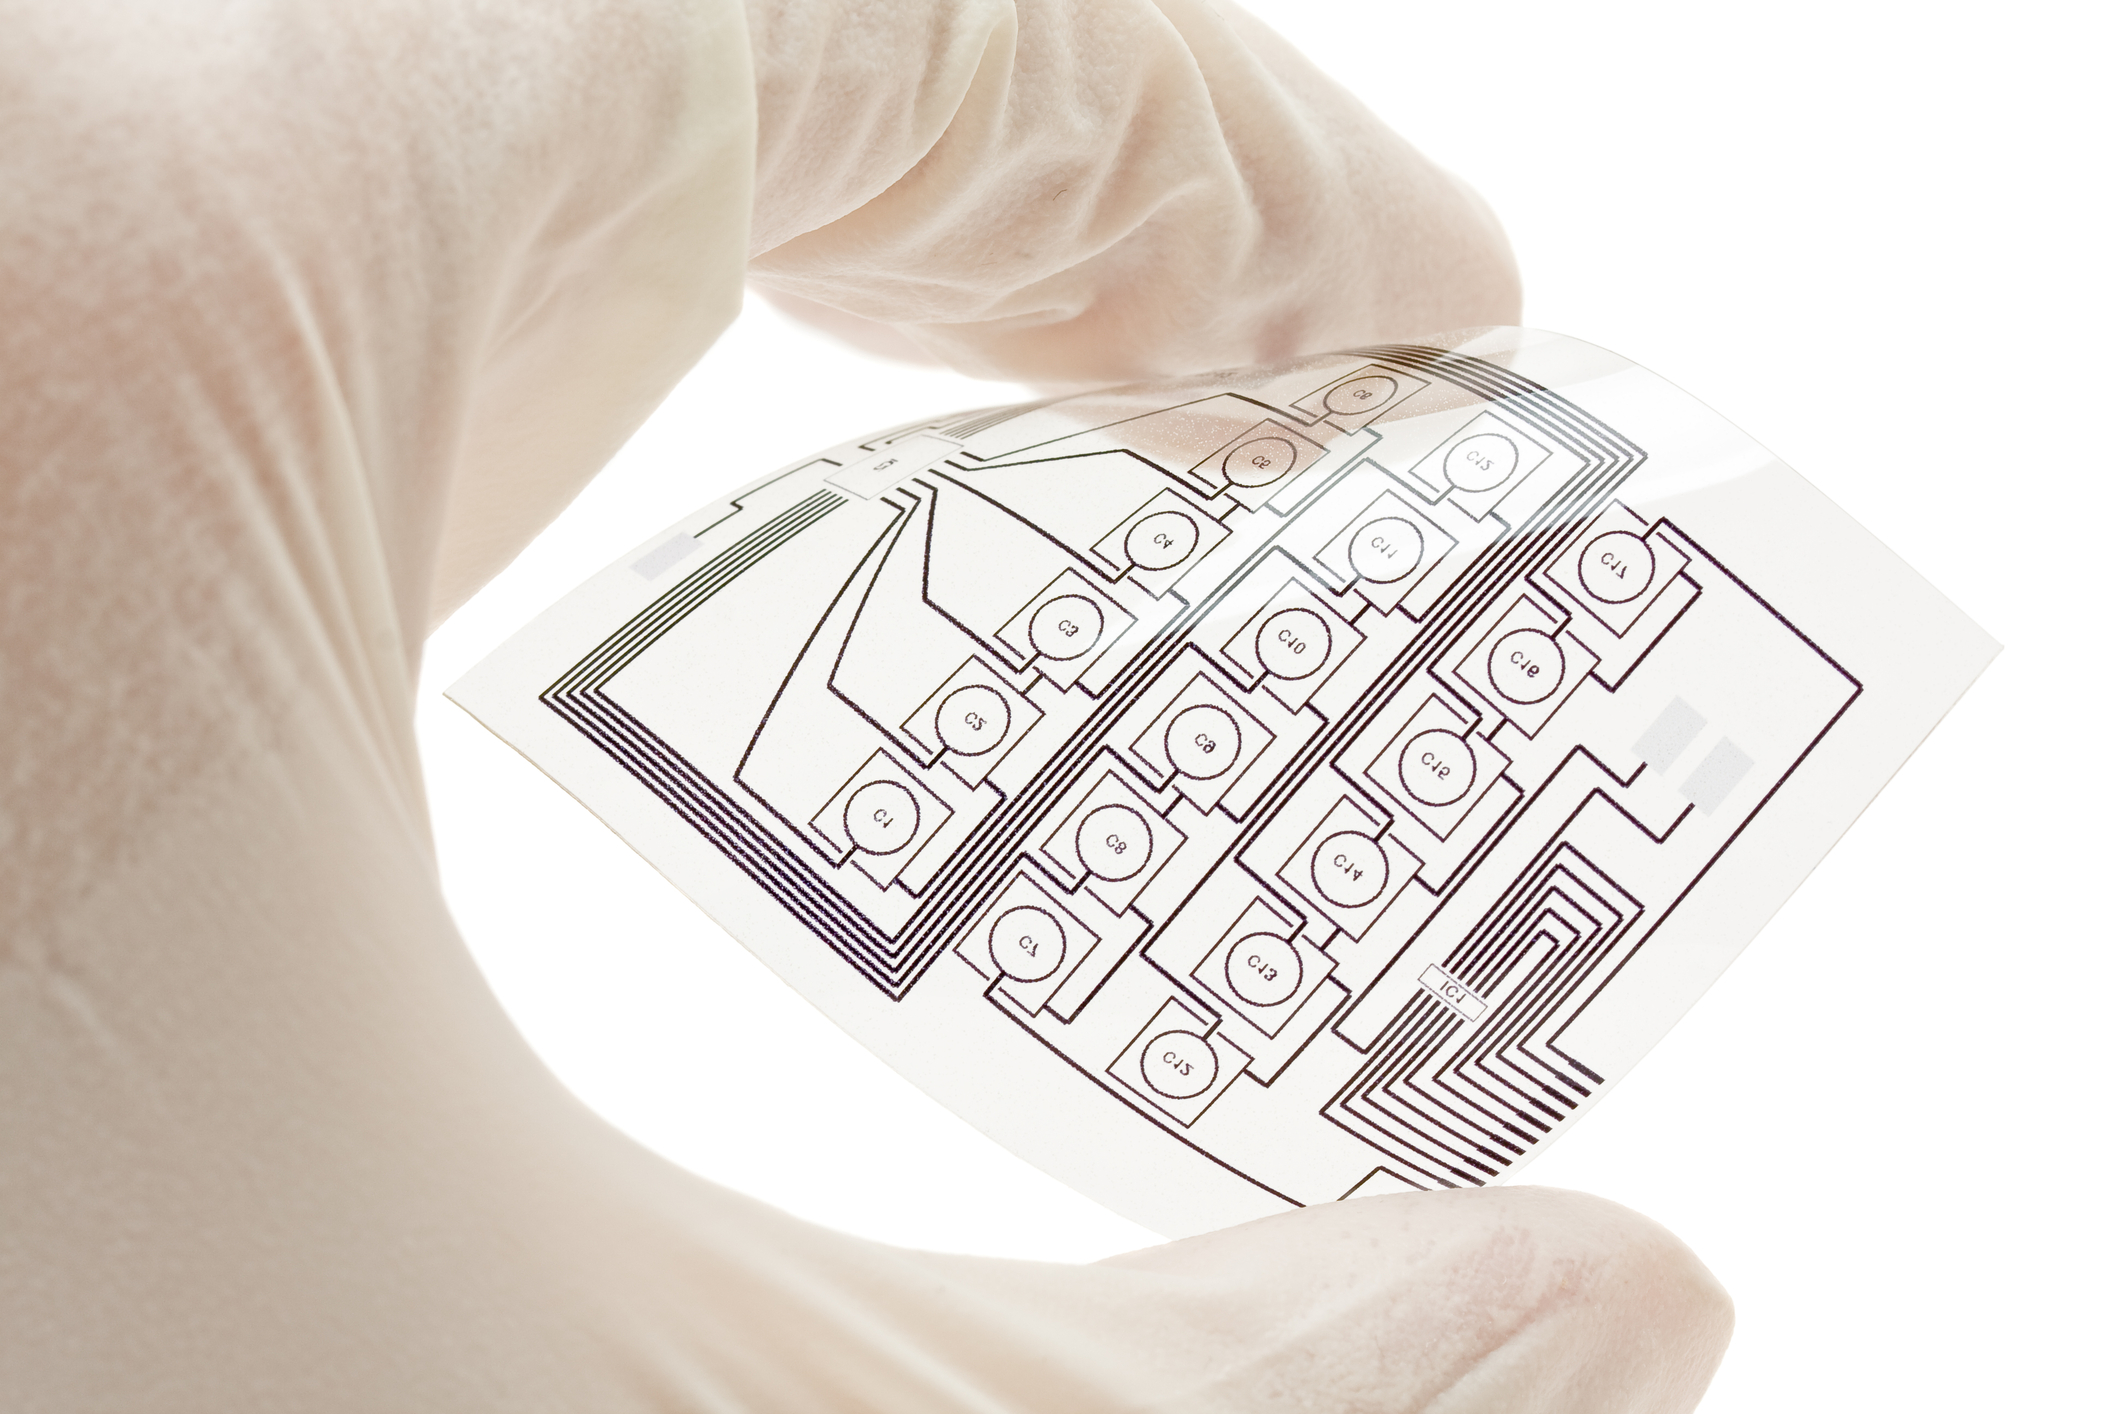 Conductive Ink for IVD Diagnostic Flexible_Circuitry